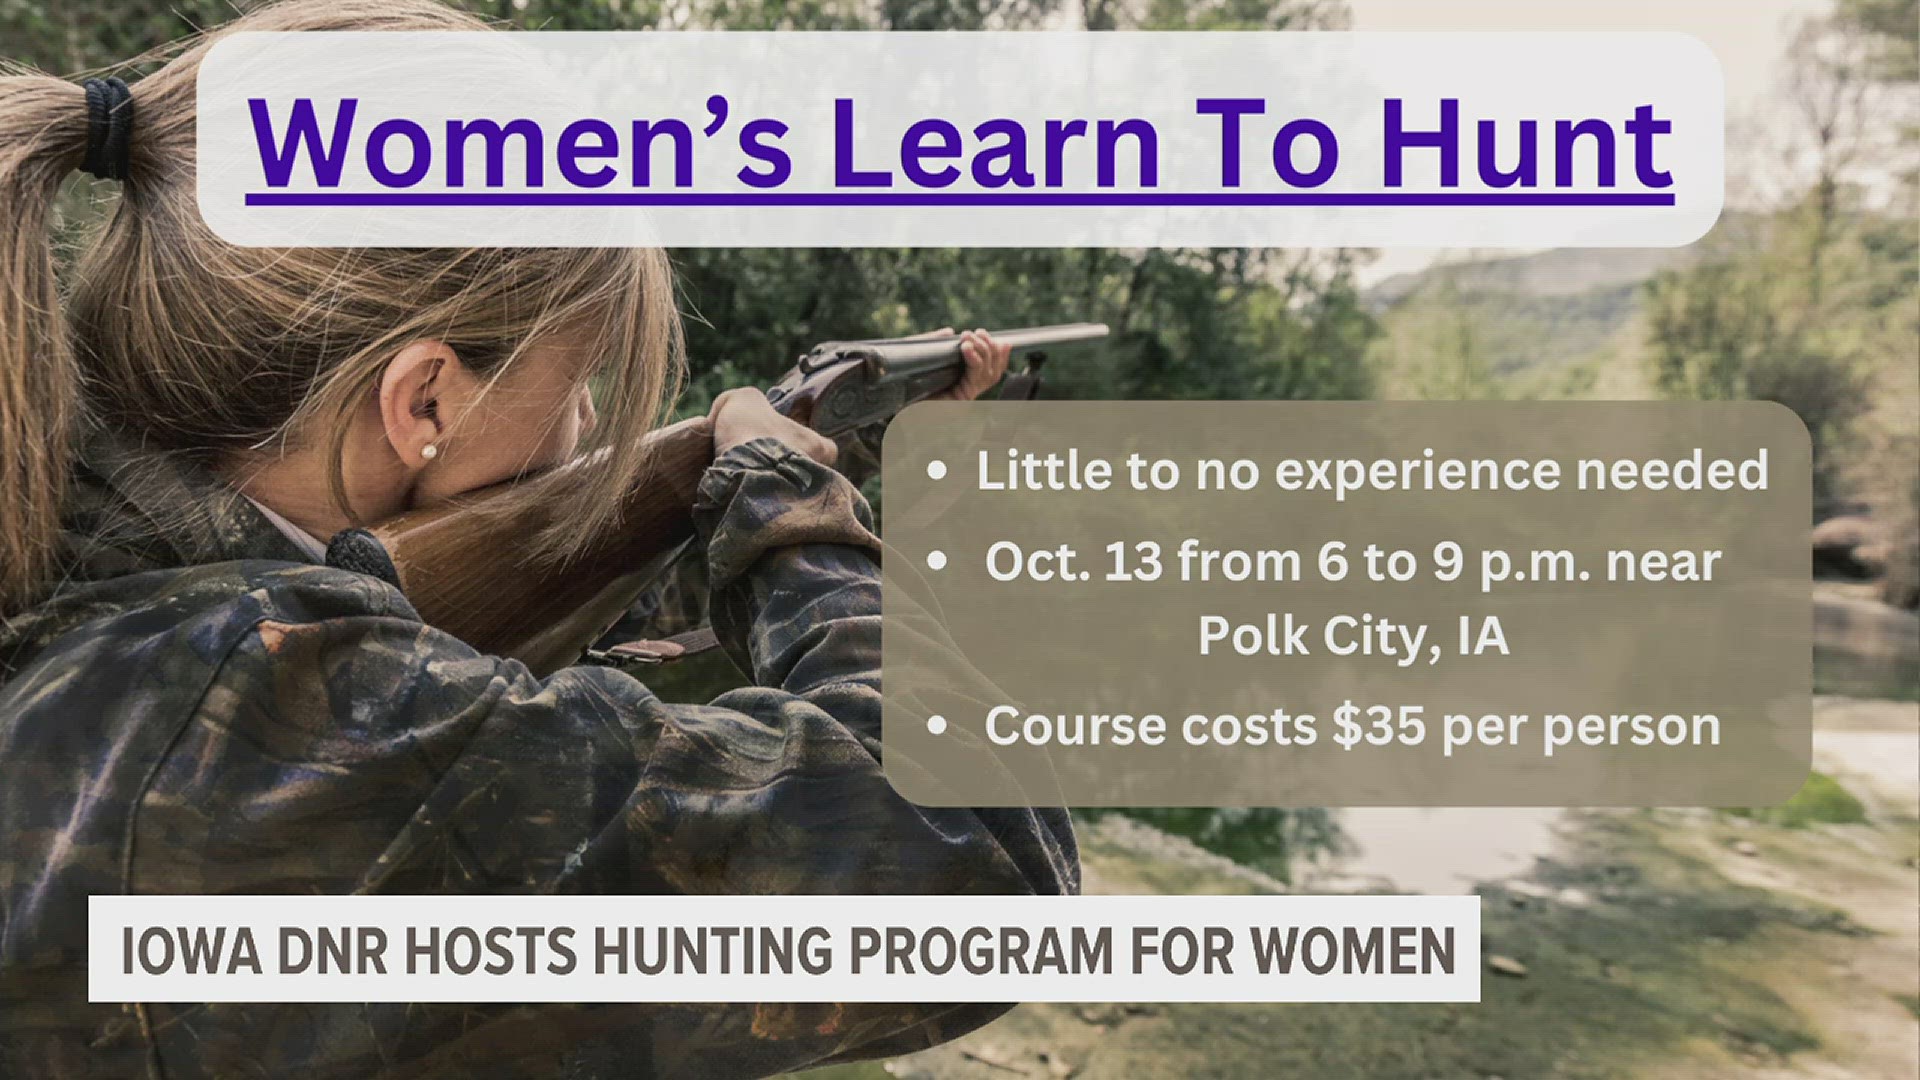 Women with little-to-no hunting experience, or those seeking to build a network of other female hunters are encouraged to sign up. The course costs $35 per person.